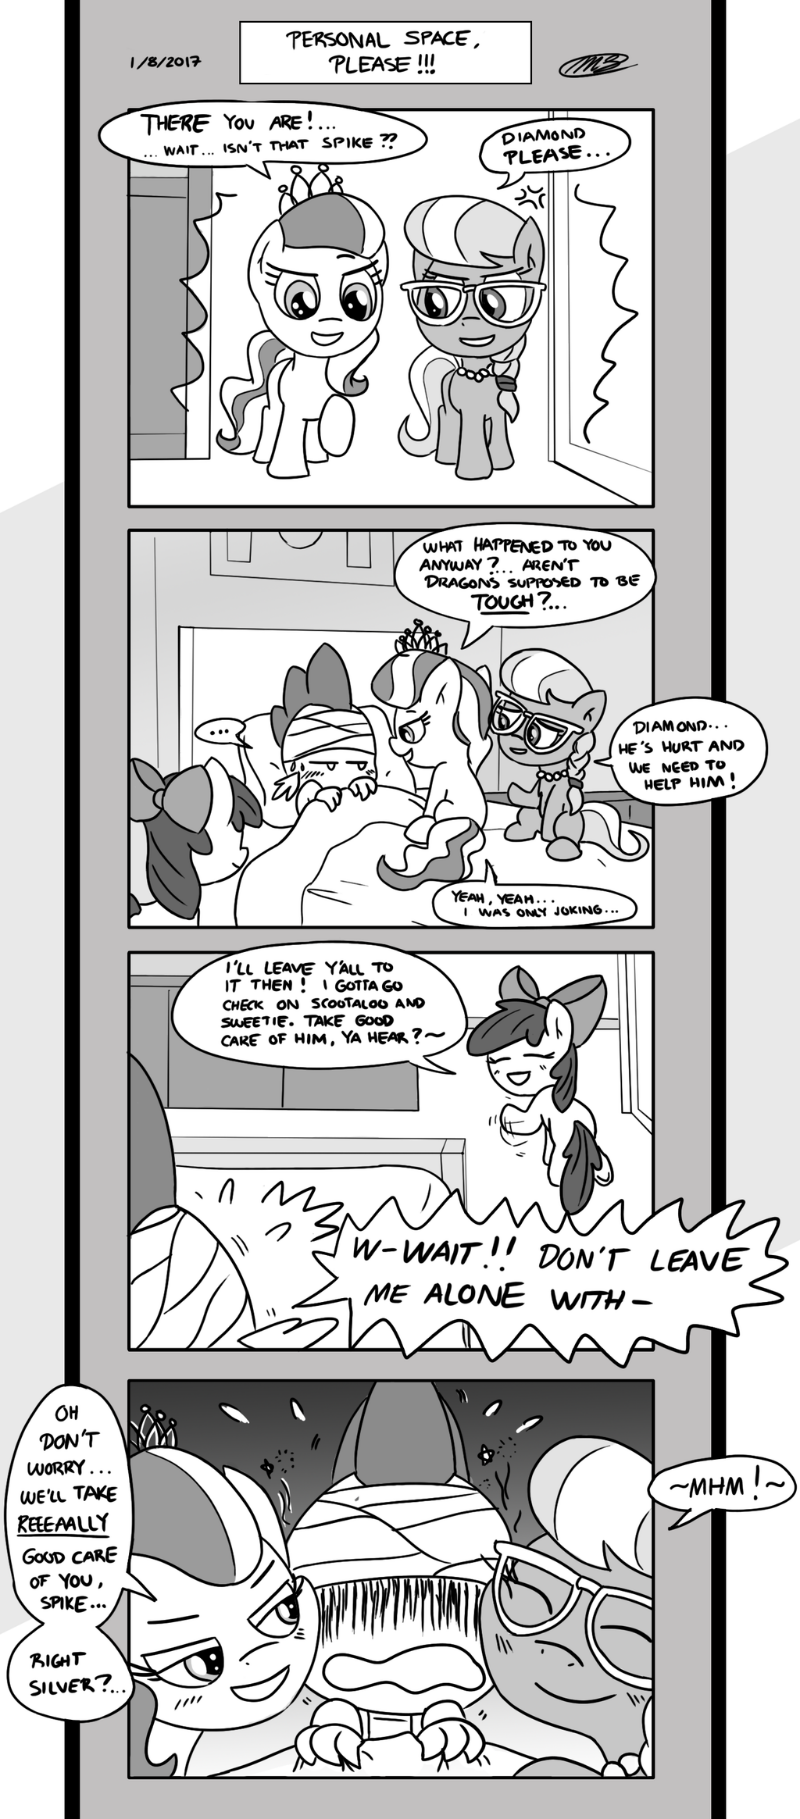 Page 3: Personal Space!!!